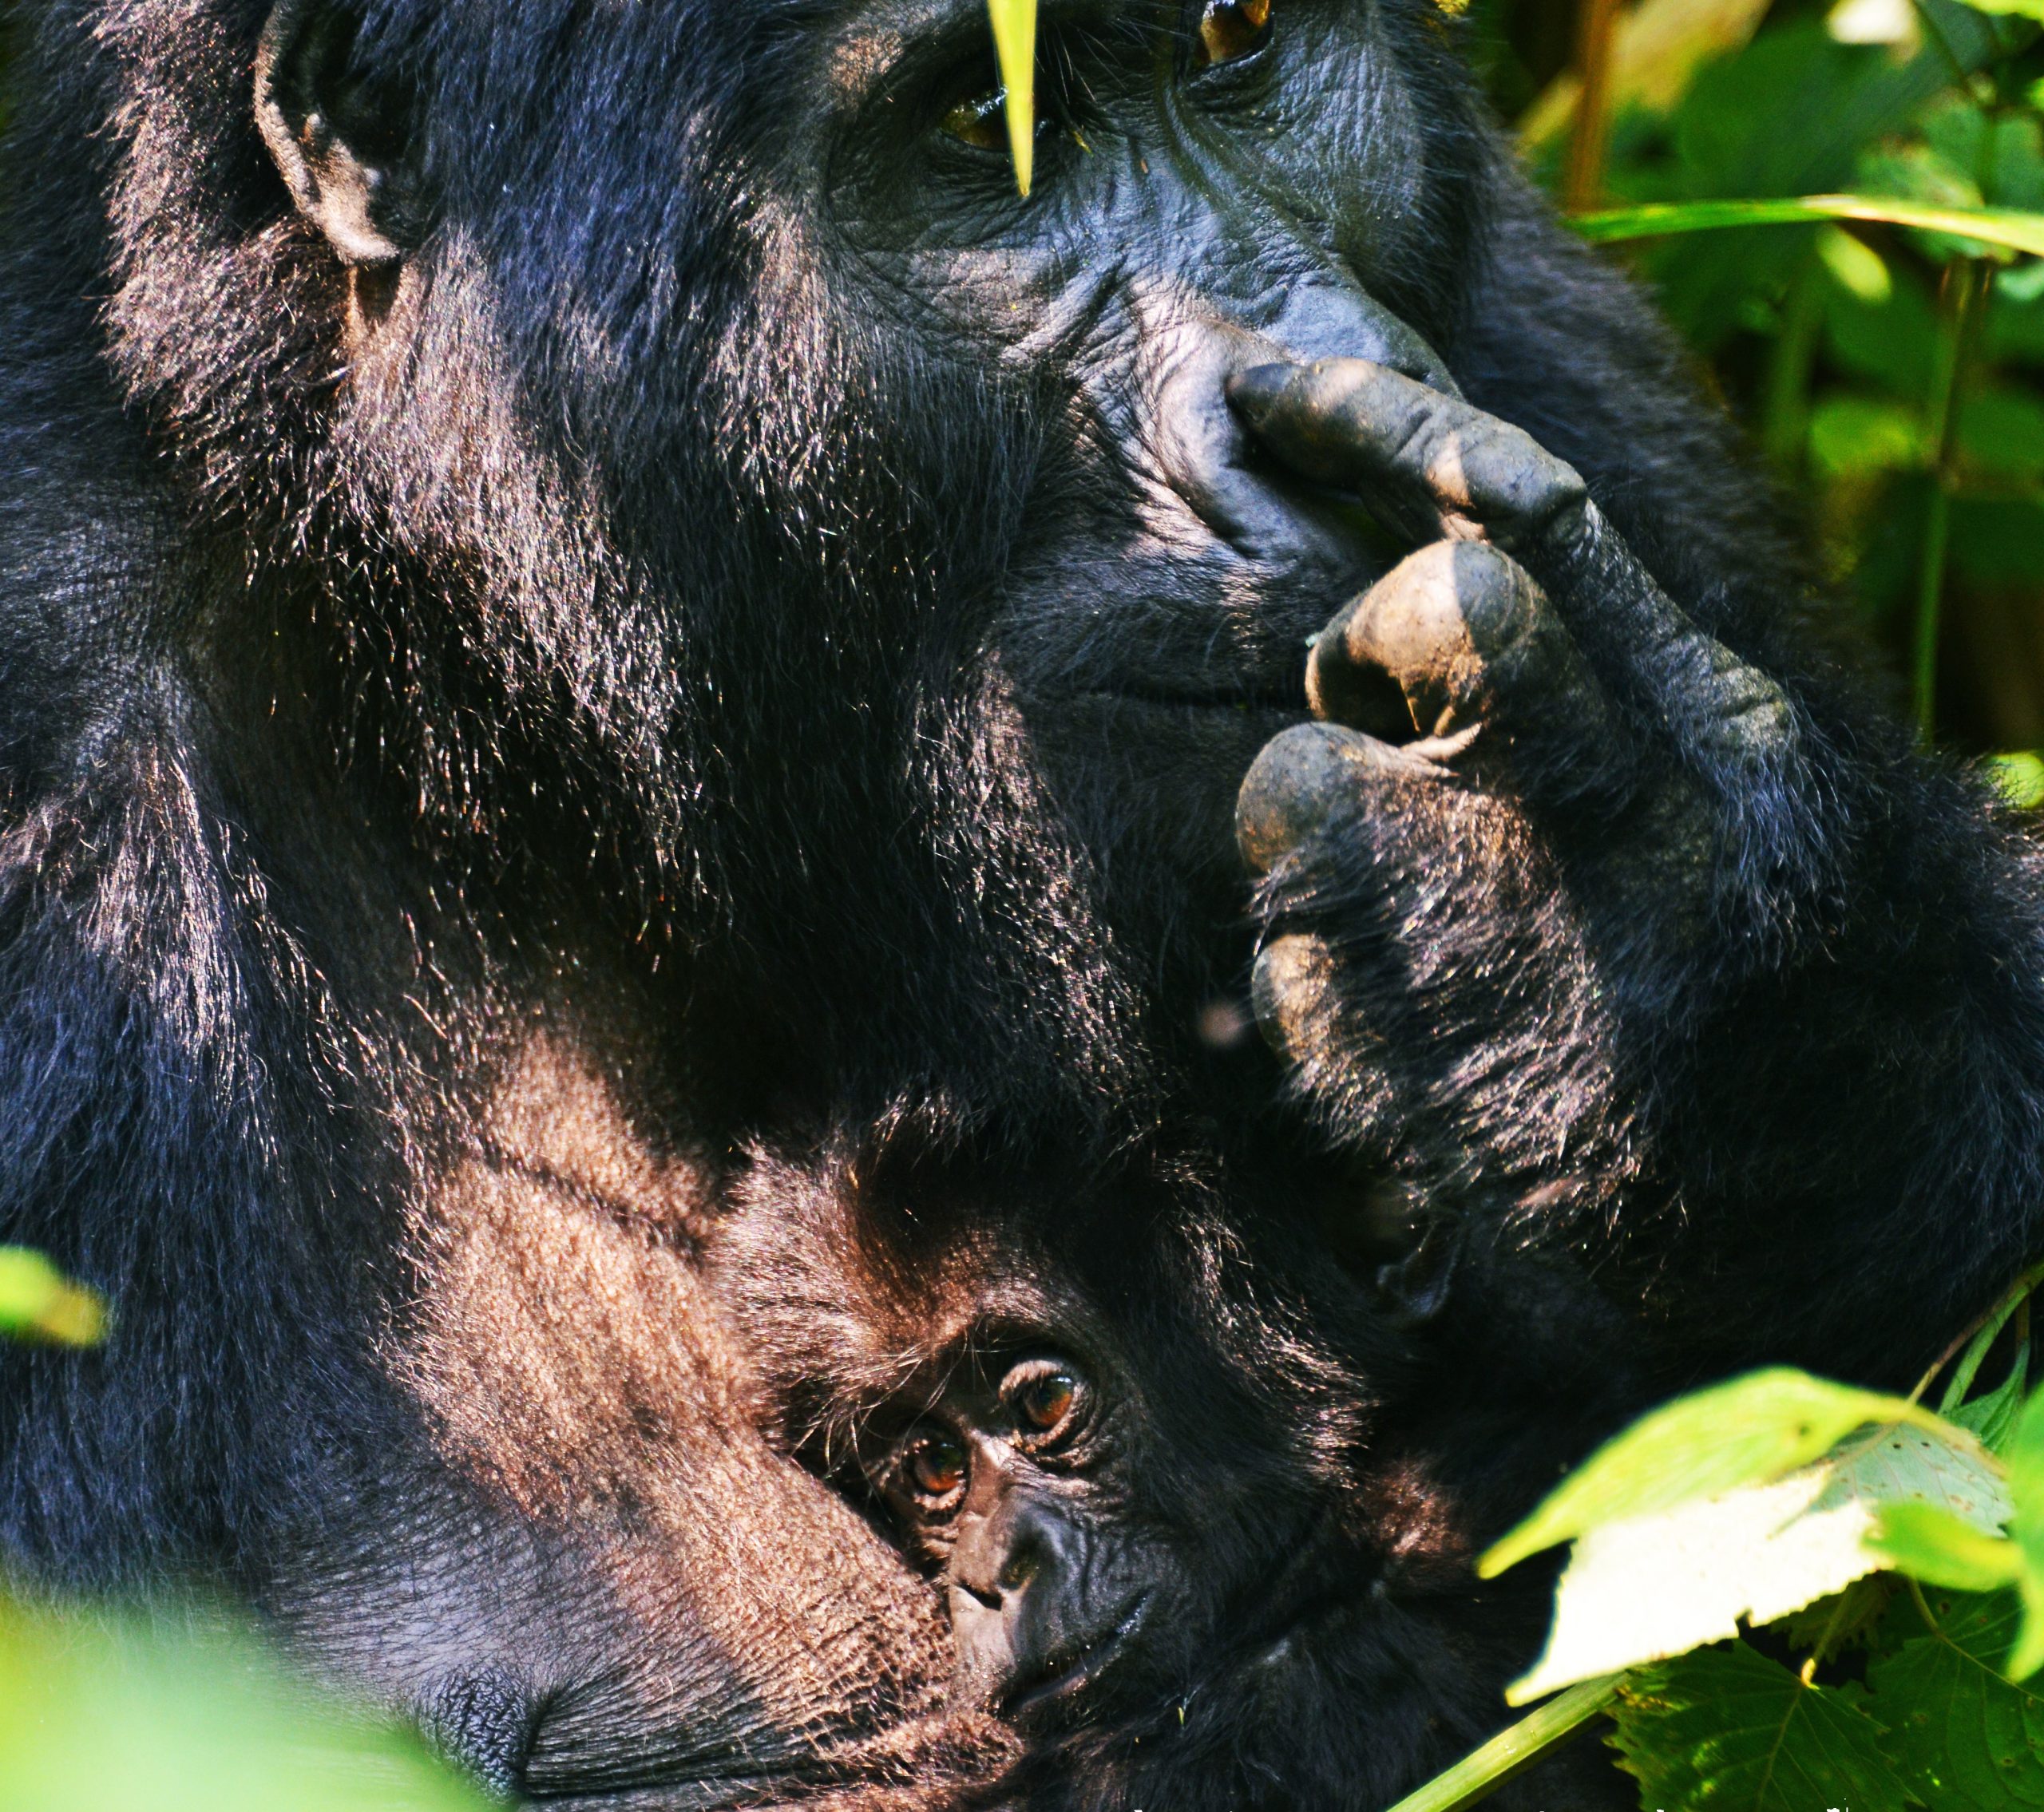 Frequently asked questions about Gorilla trekking